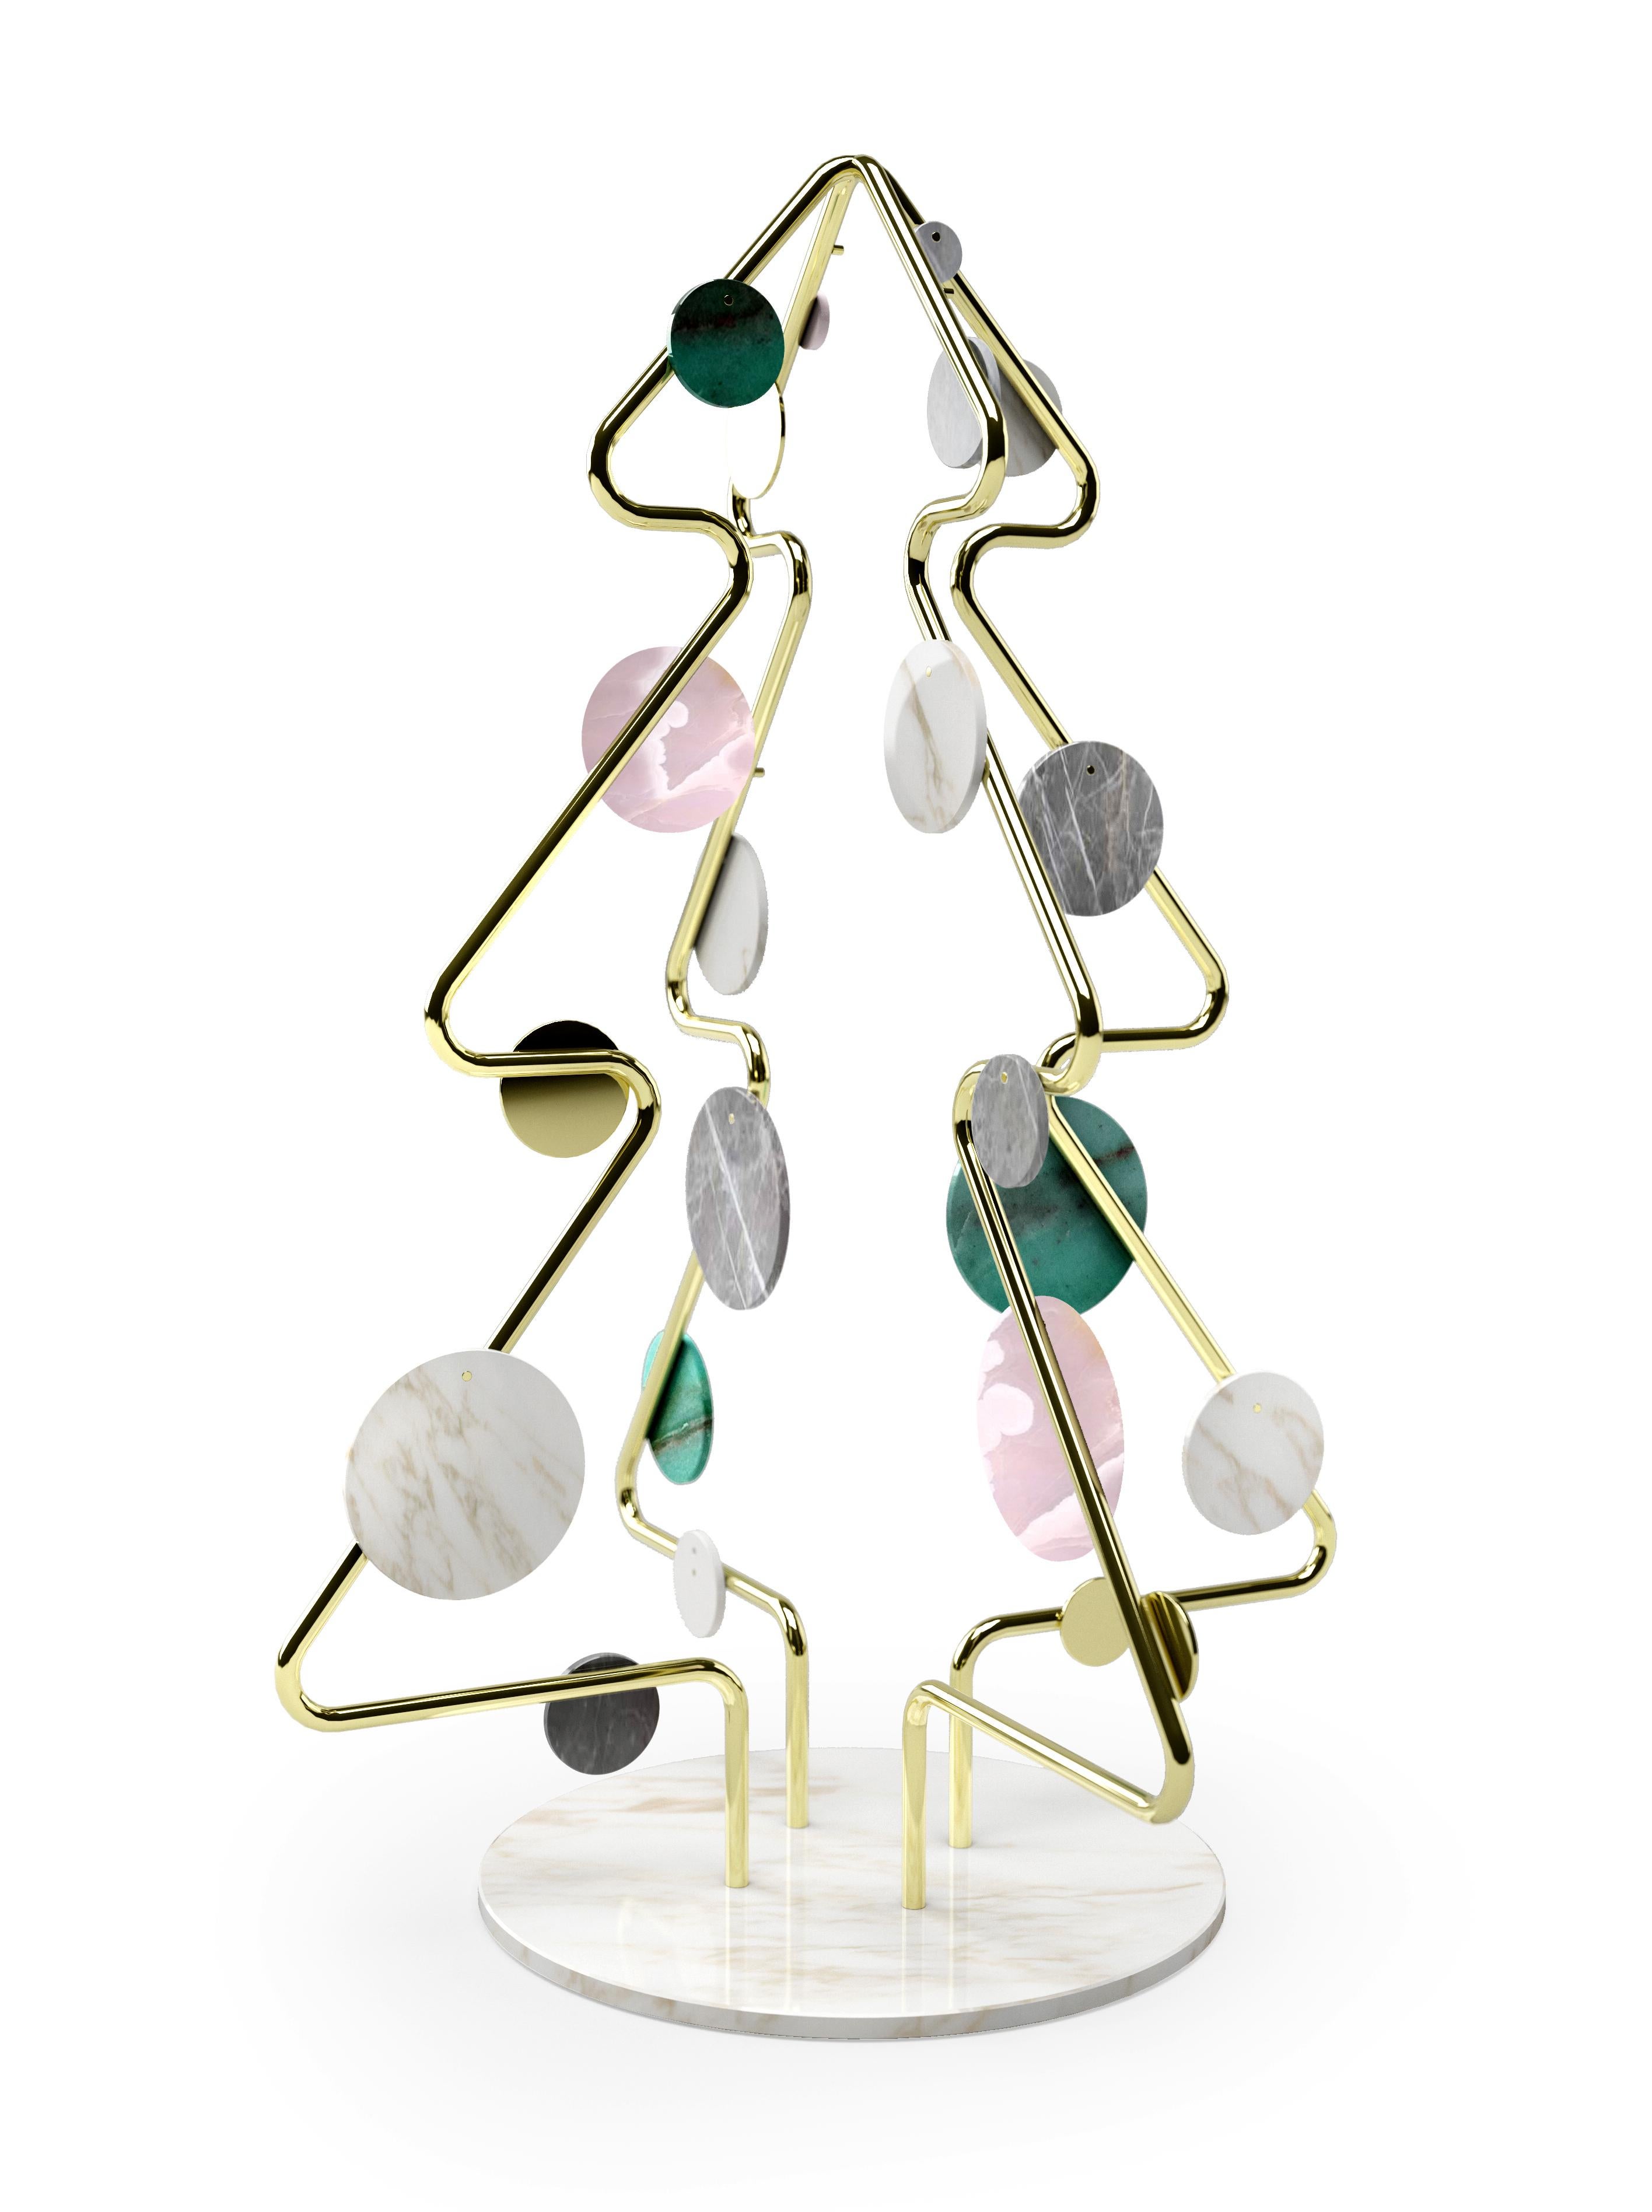 Italian Christmas Tree Decorative Sculpture Marble Onyx Steel Collectible Design Italy For Sale